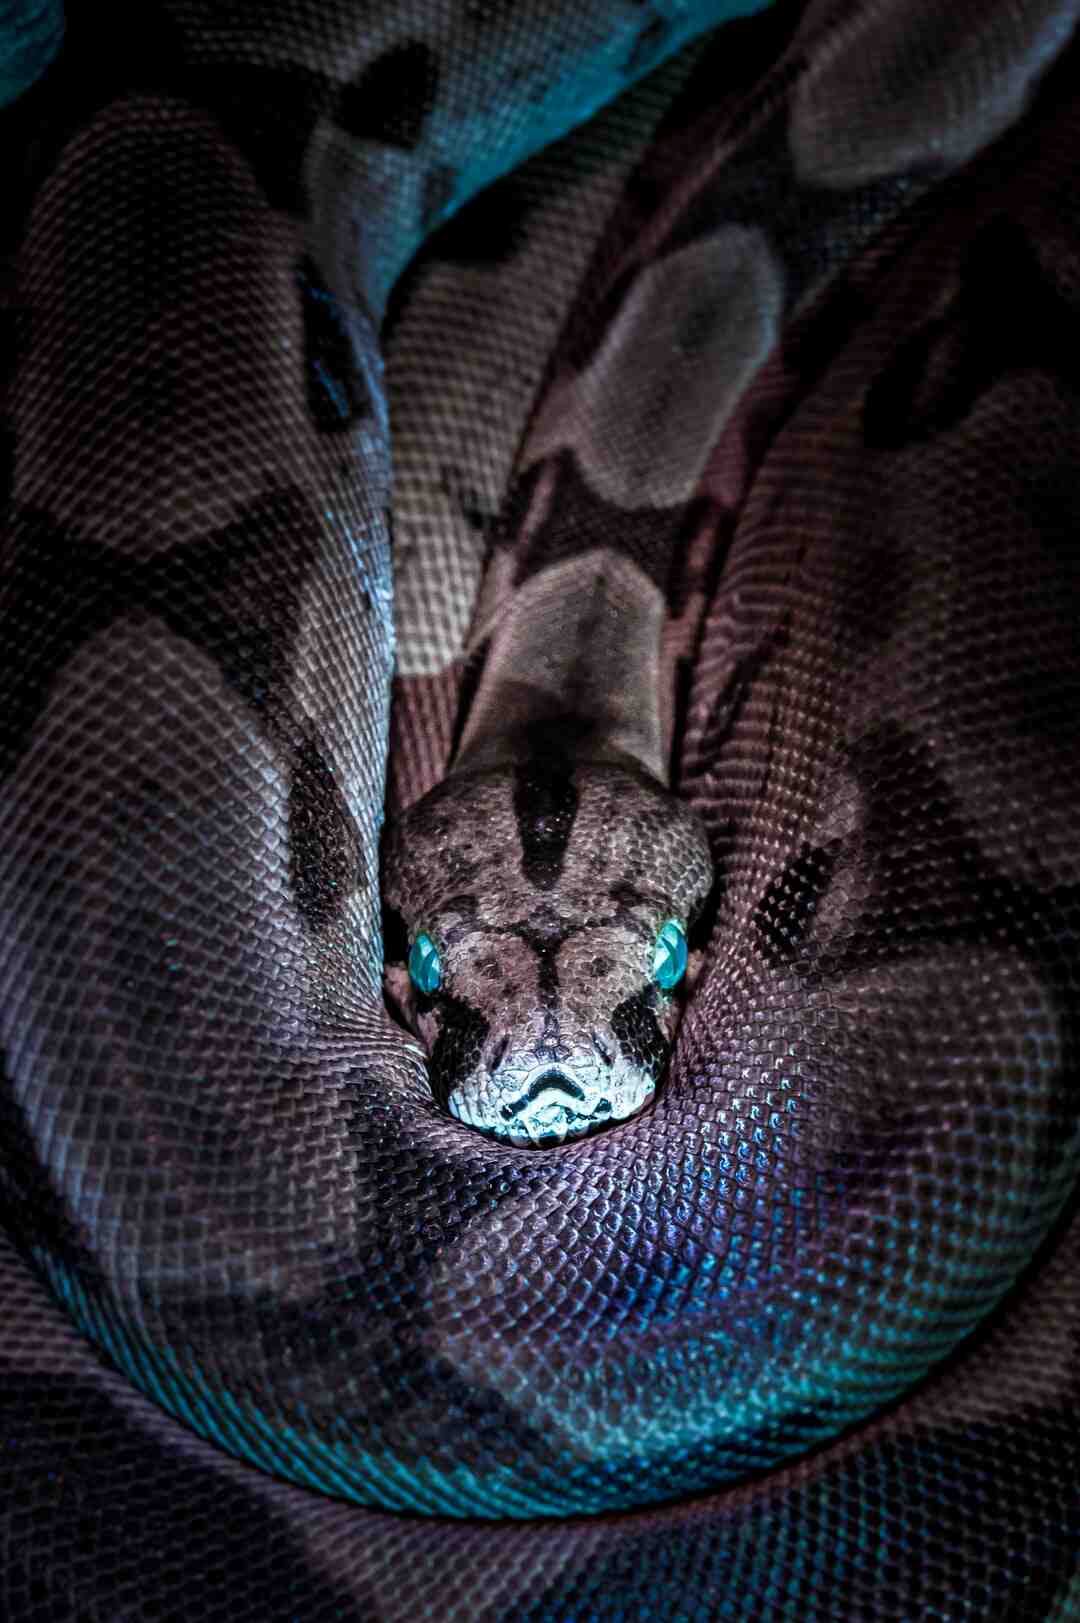 How to recognize a type of snake?